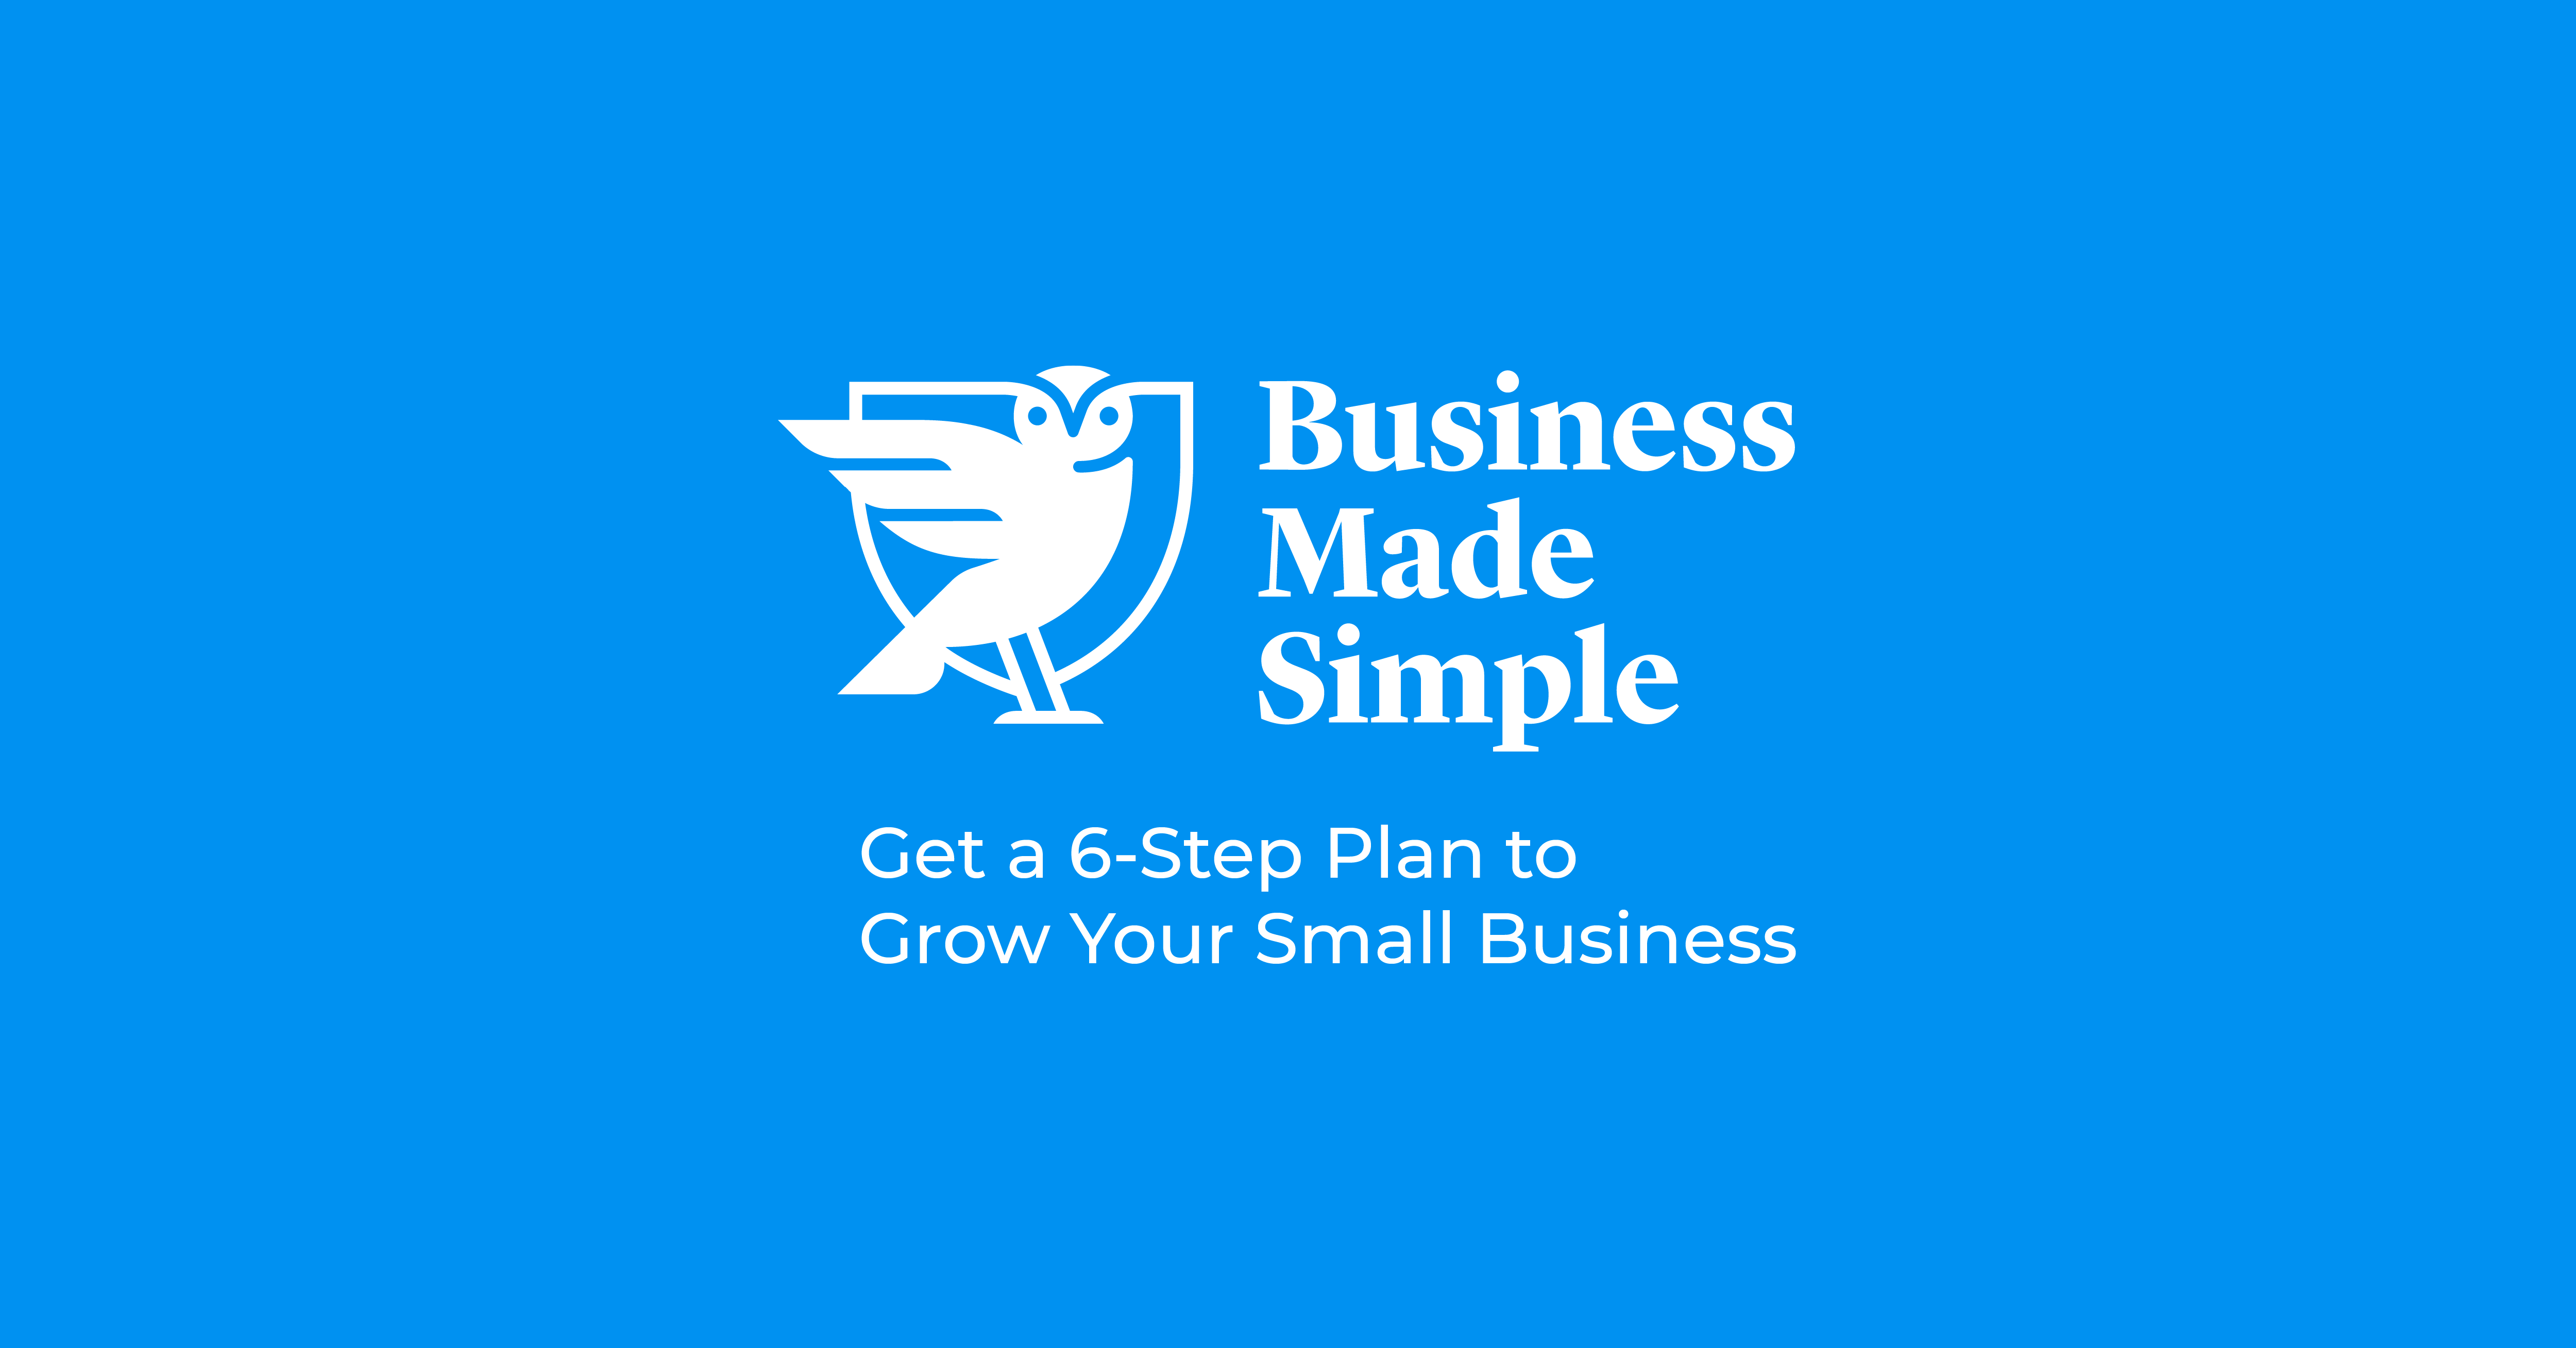 Donald Miller – Business Made Simple Download